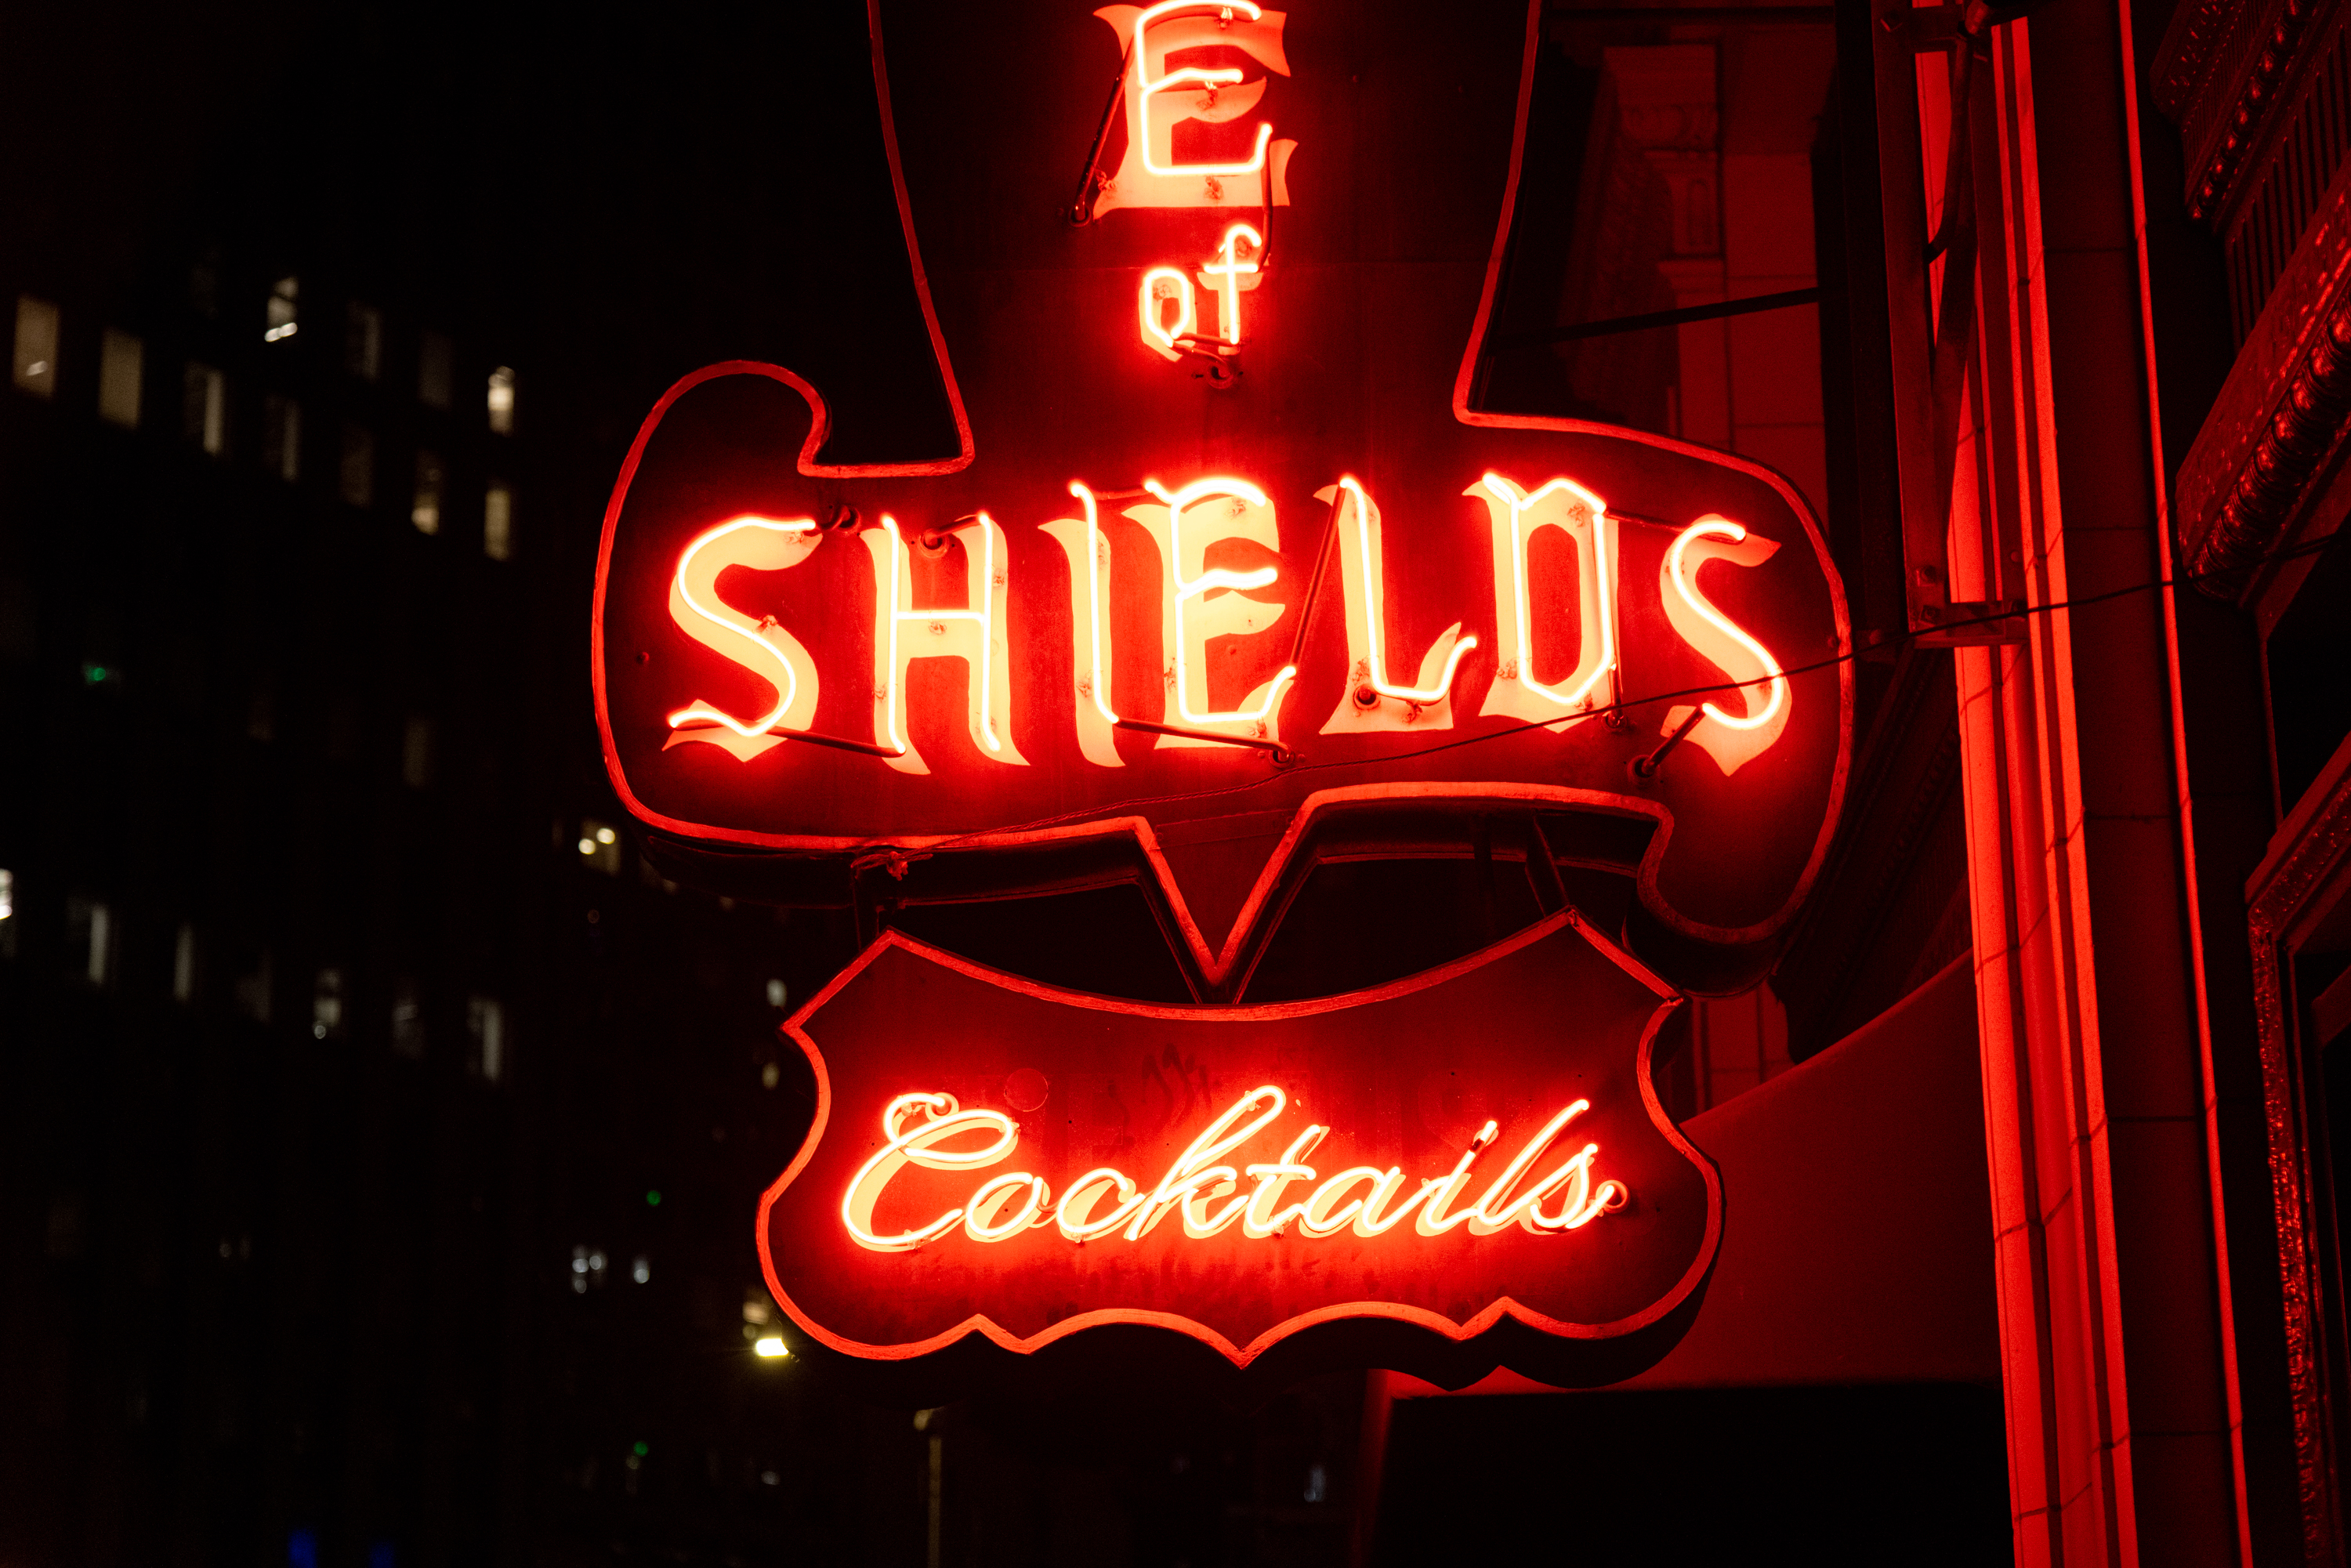 A red neon sign at night that reads &quot;SHIELDS Cocktails&quot;